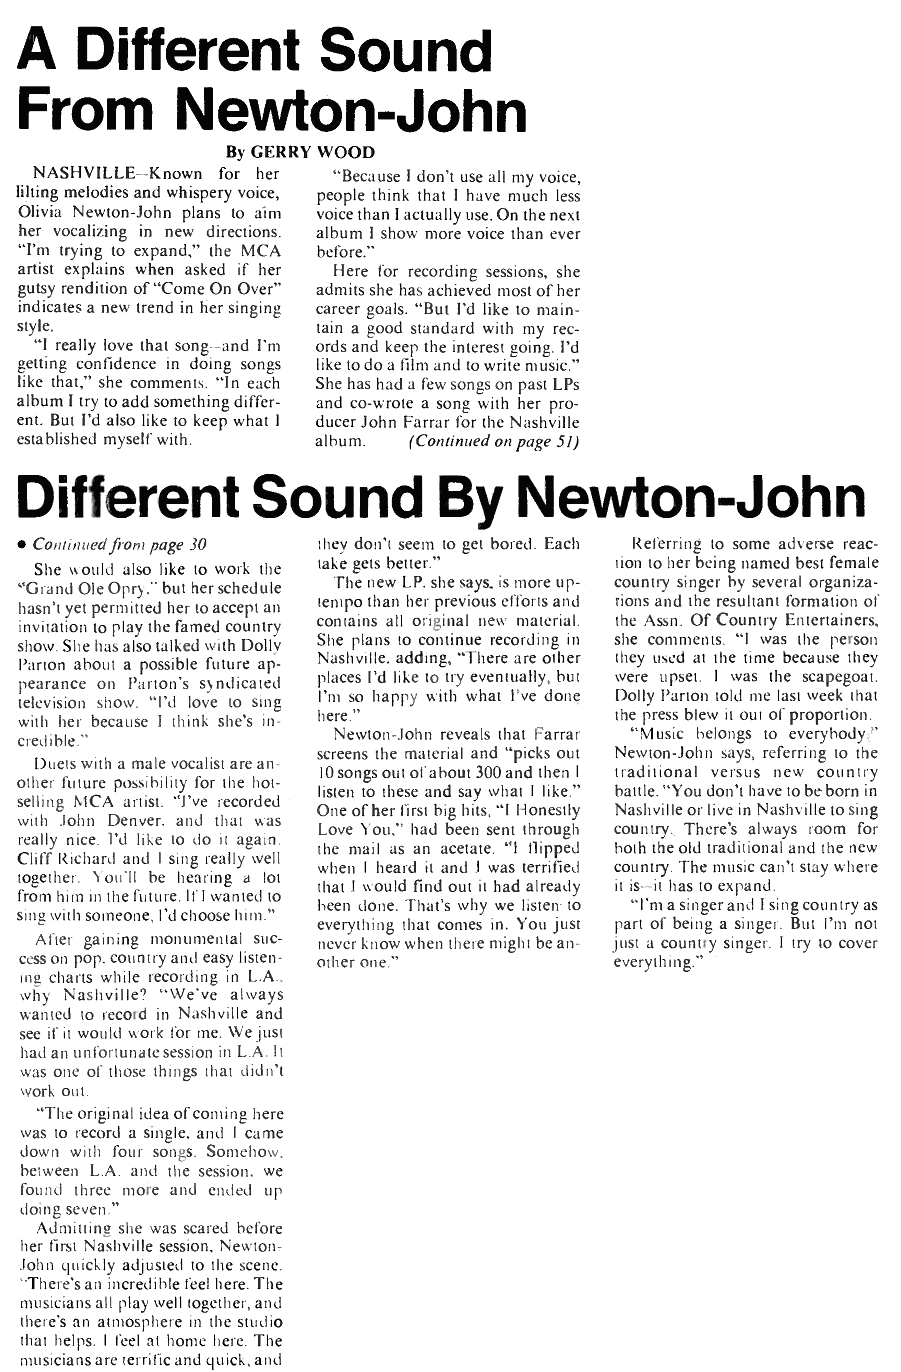 A Different Sound from Newton-John, about the forthcoming album Don't Stop Believin - Billboard